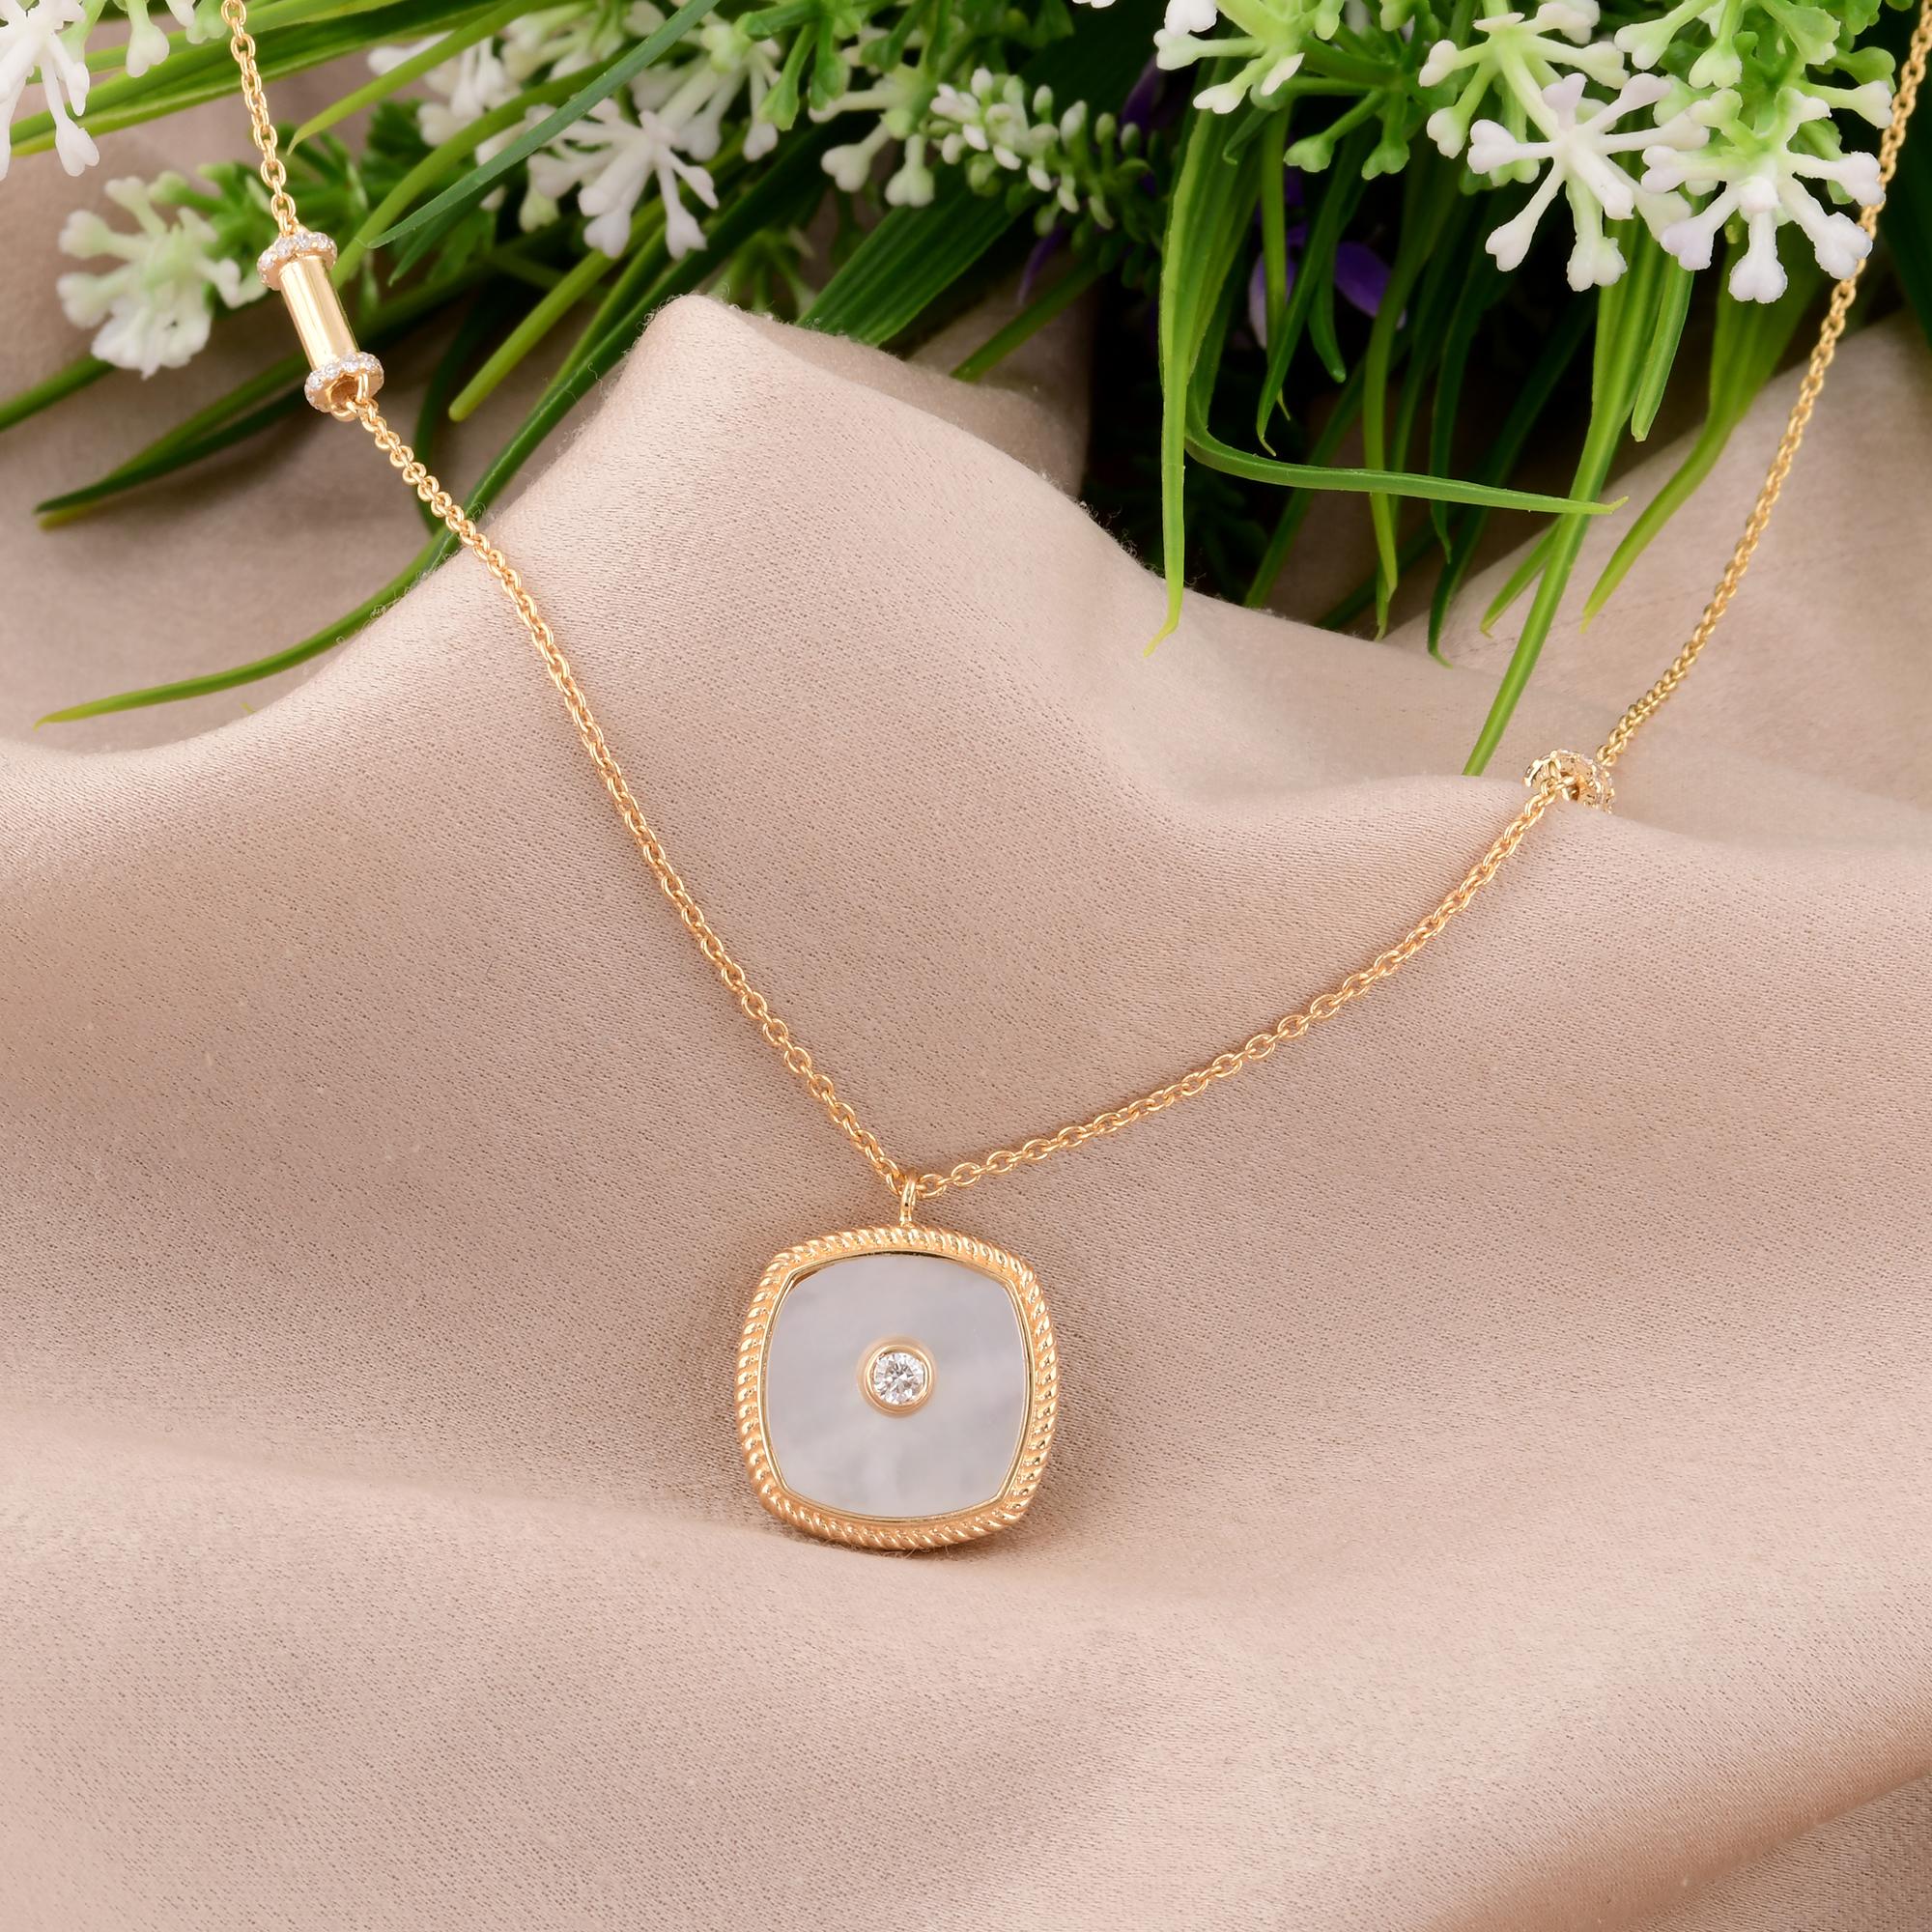 The design of the necklace is both elegant and versatile, with the mother of pearl charm suspended from a delicate yellow gold chain. The timeless charm necklace style adds a touch of whimsy and femininity to any ensemble, making it the perfect